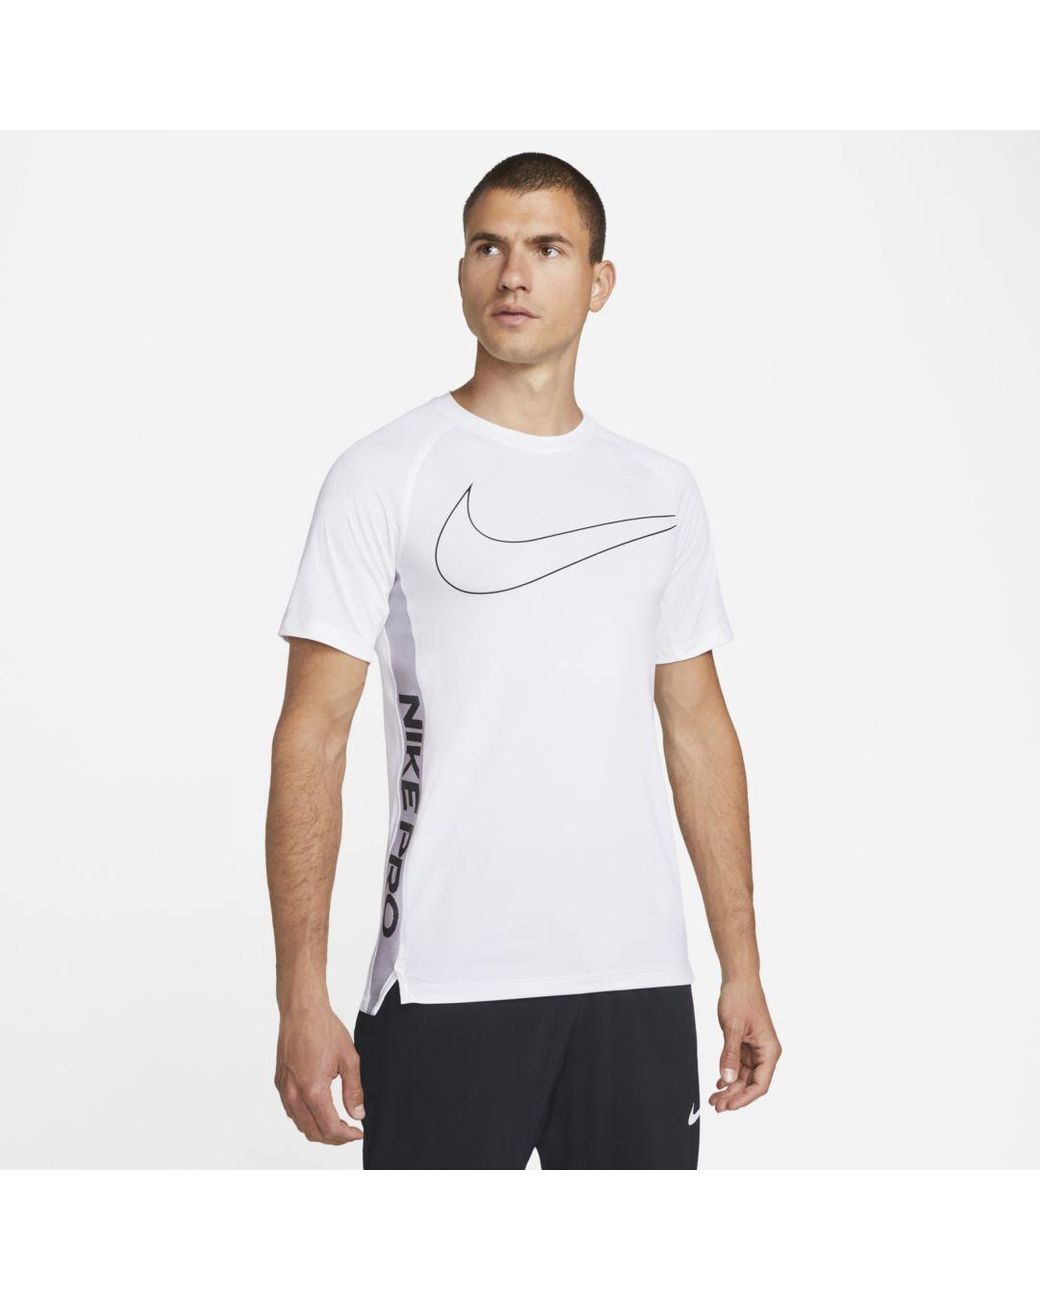 Nike Synthetic Pro Dri-fit Slim Fit Training Top in White,White,Black ...